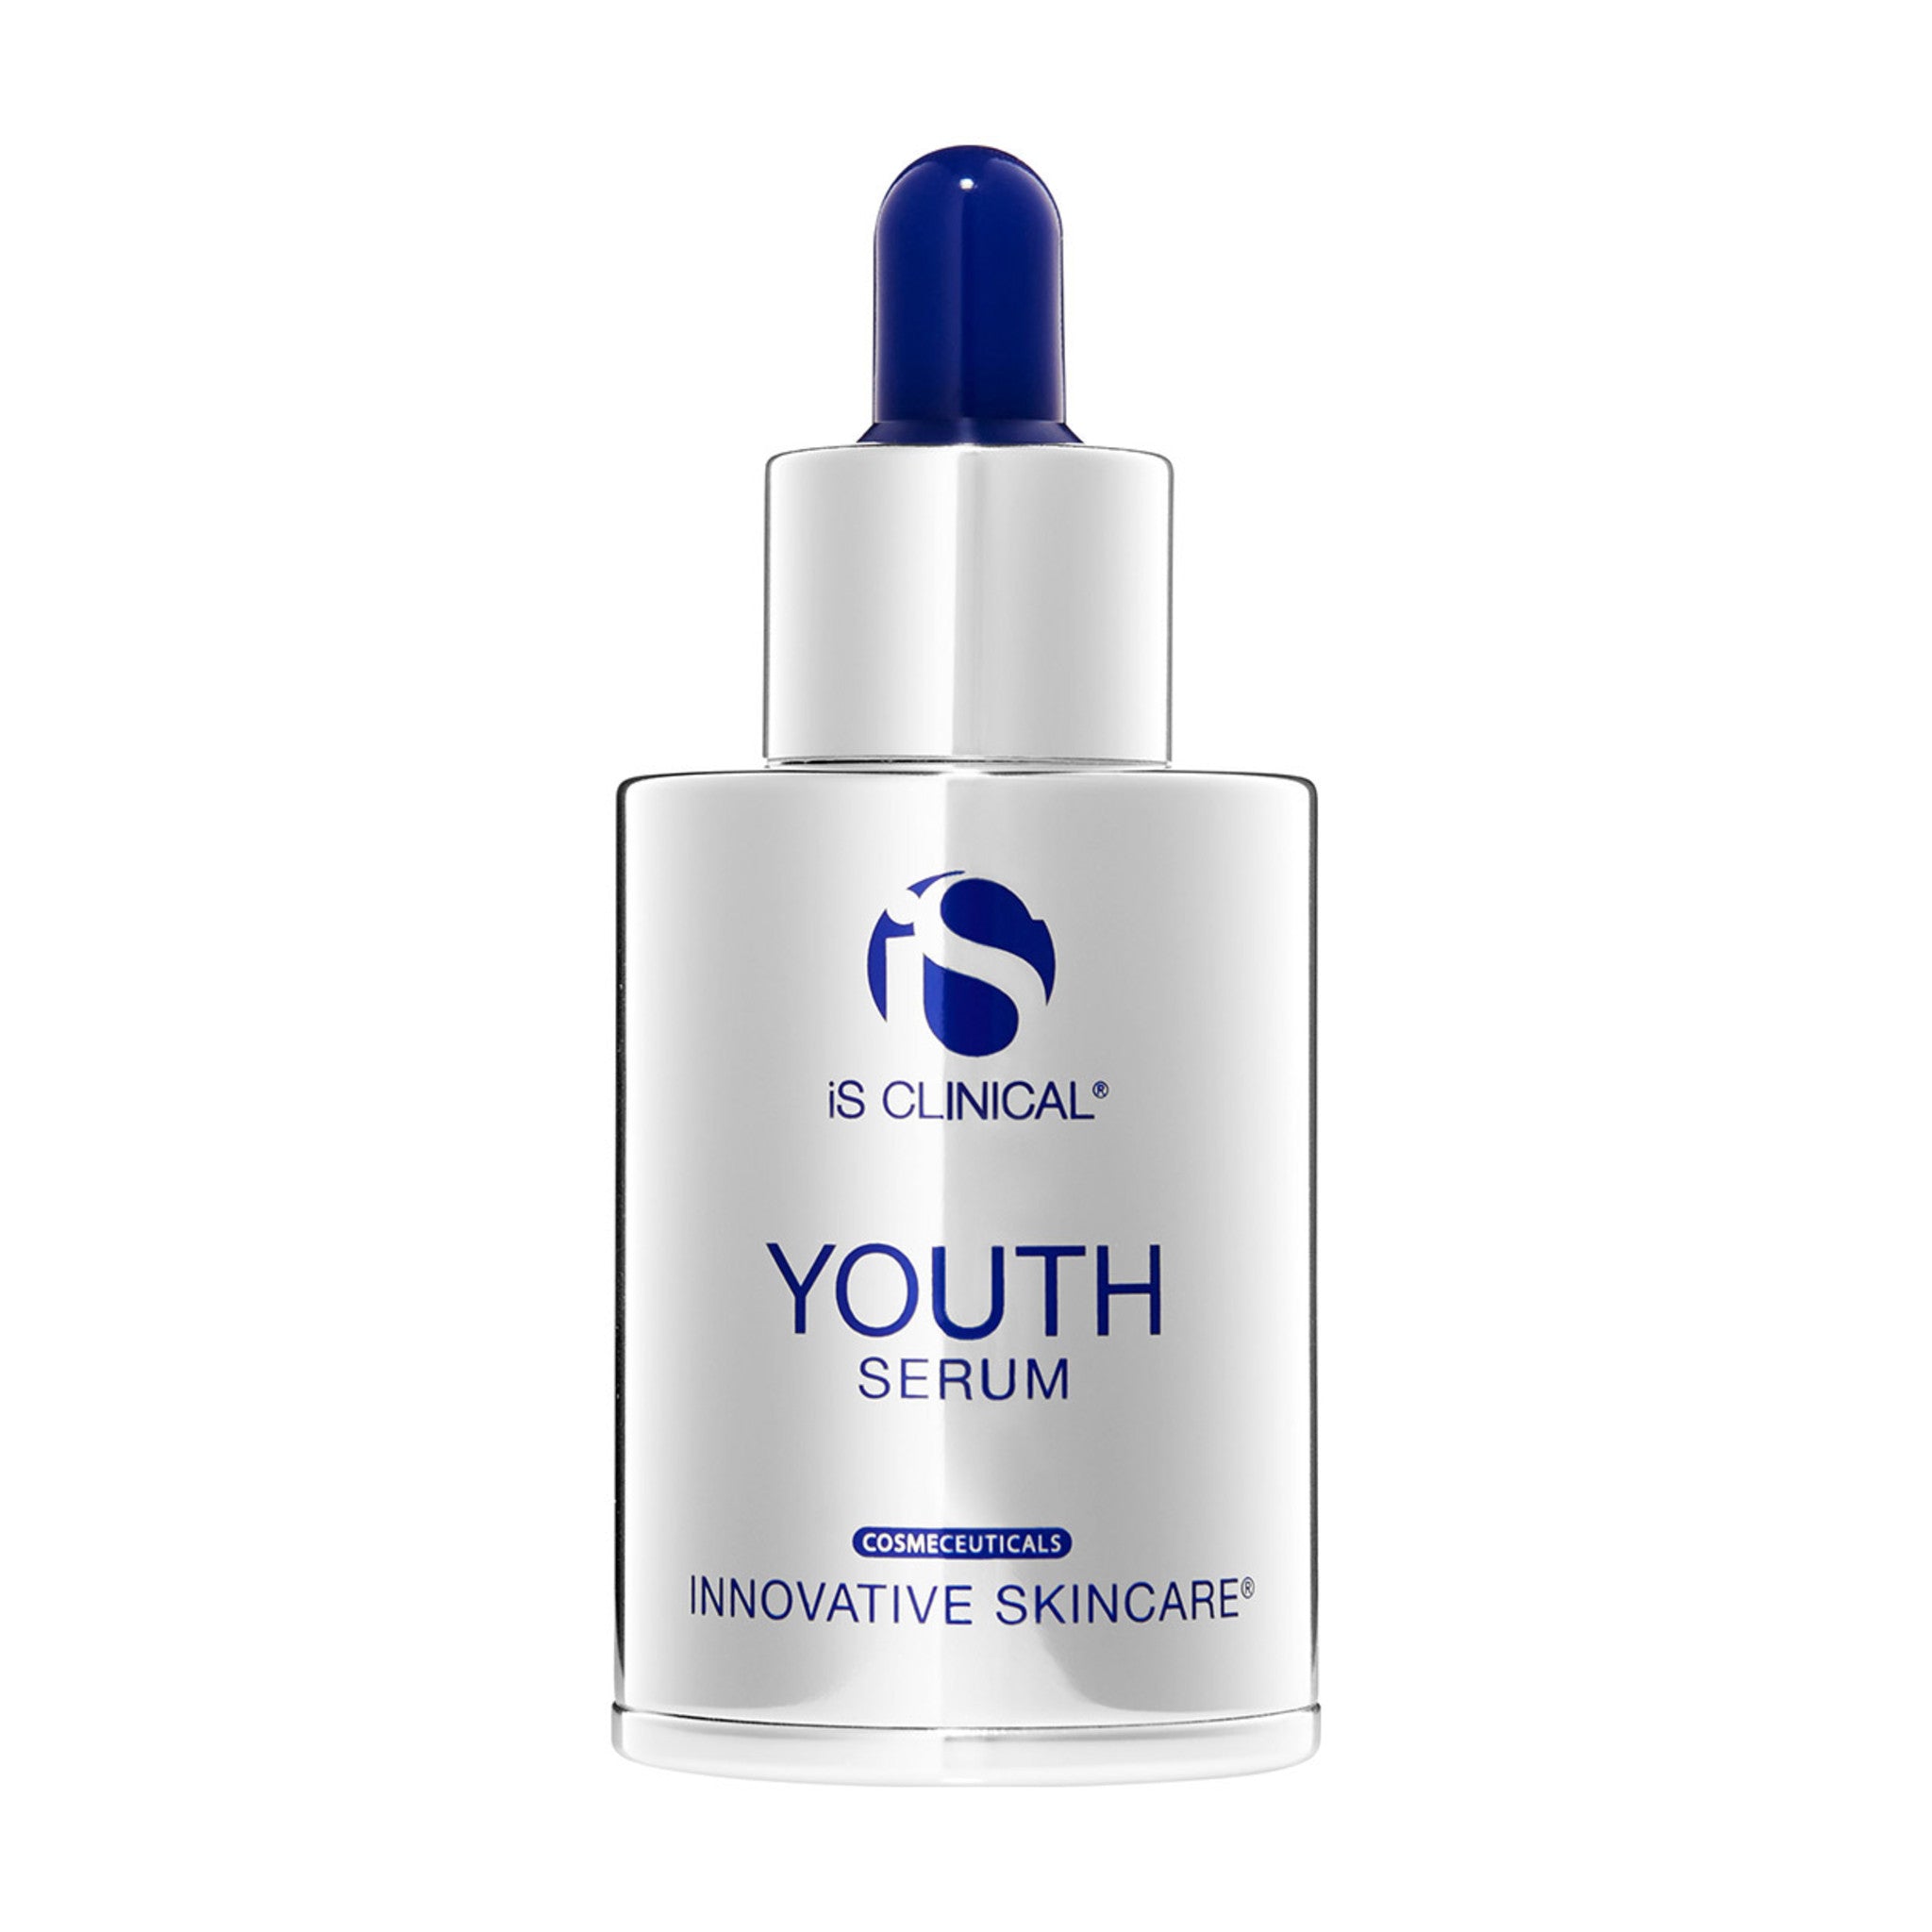 IS Clinical Youth Serum main image.